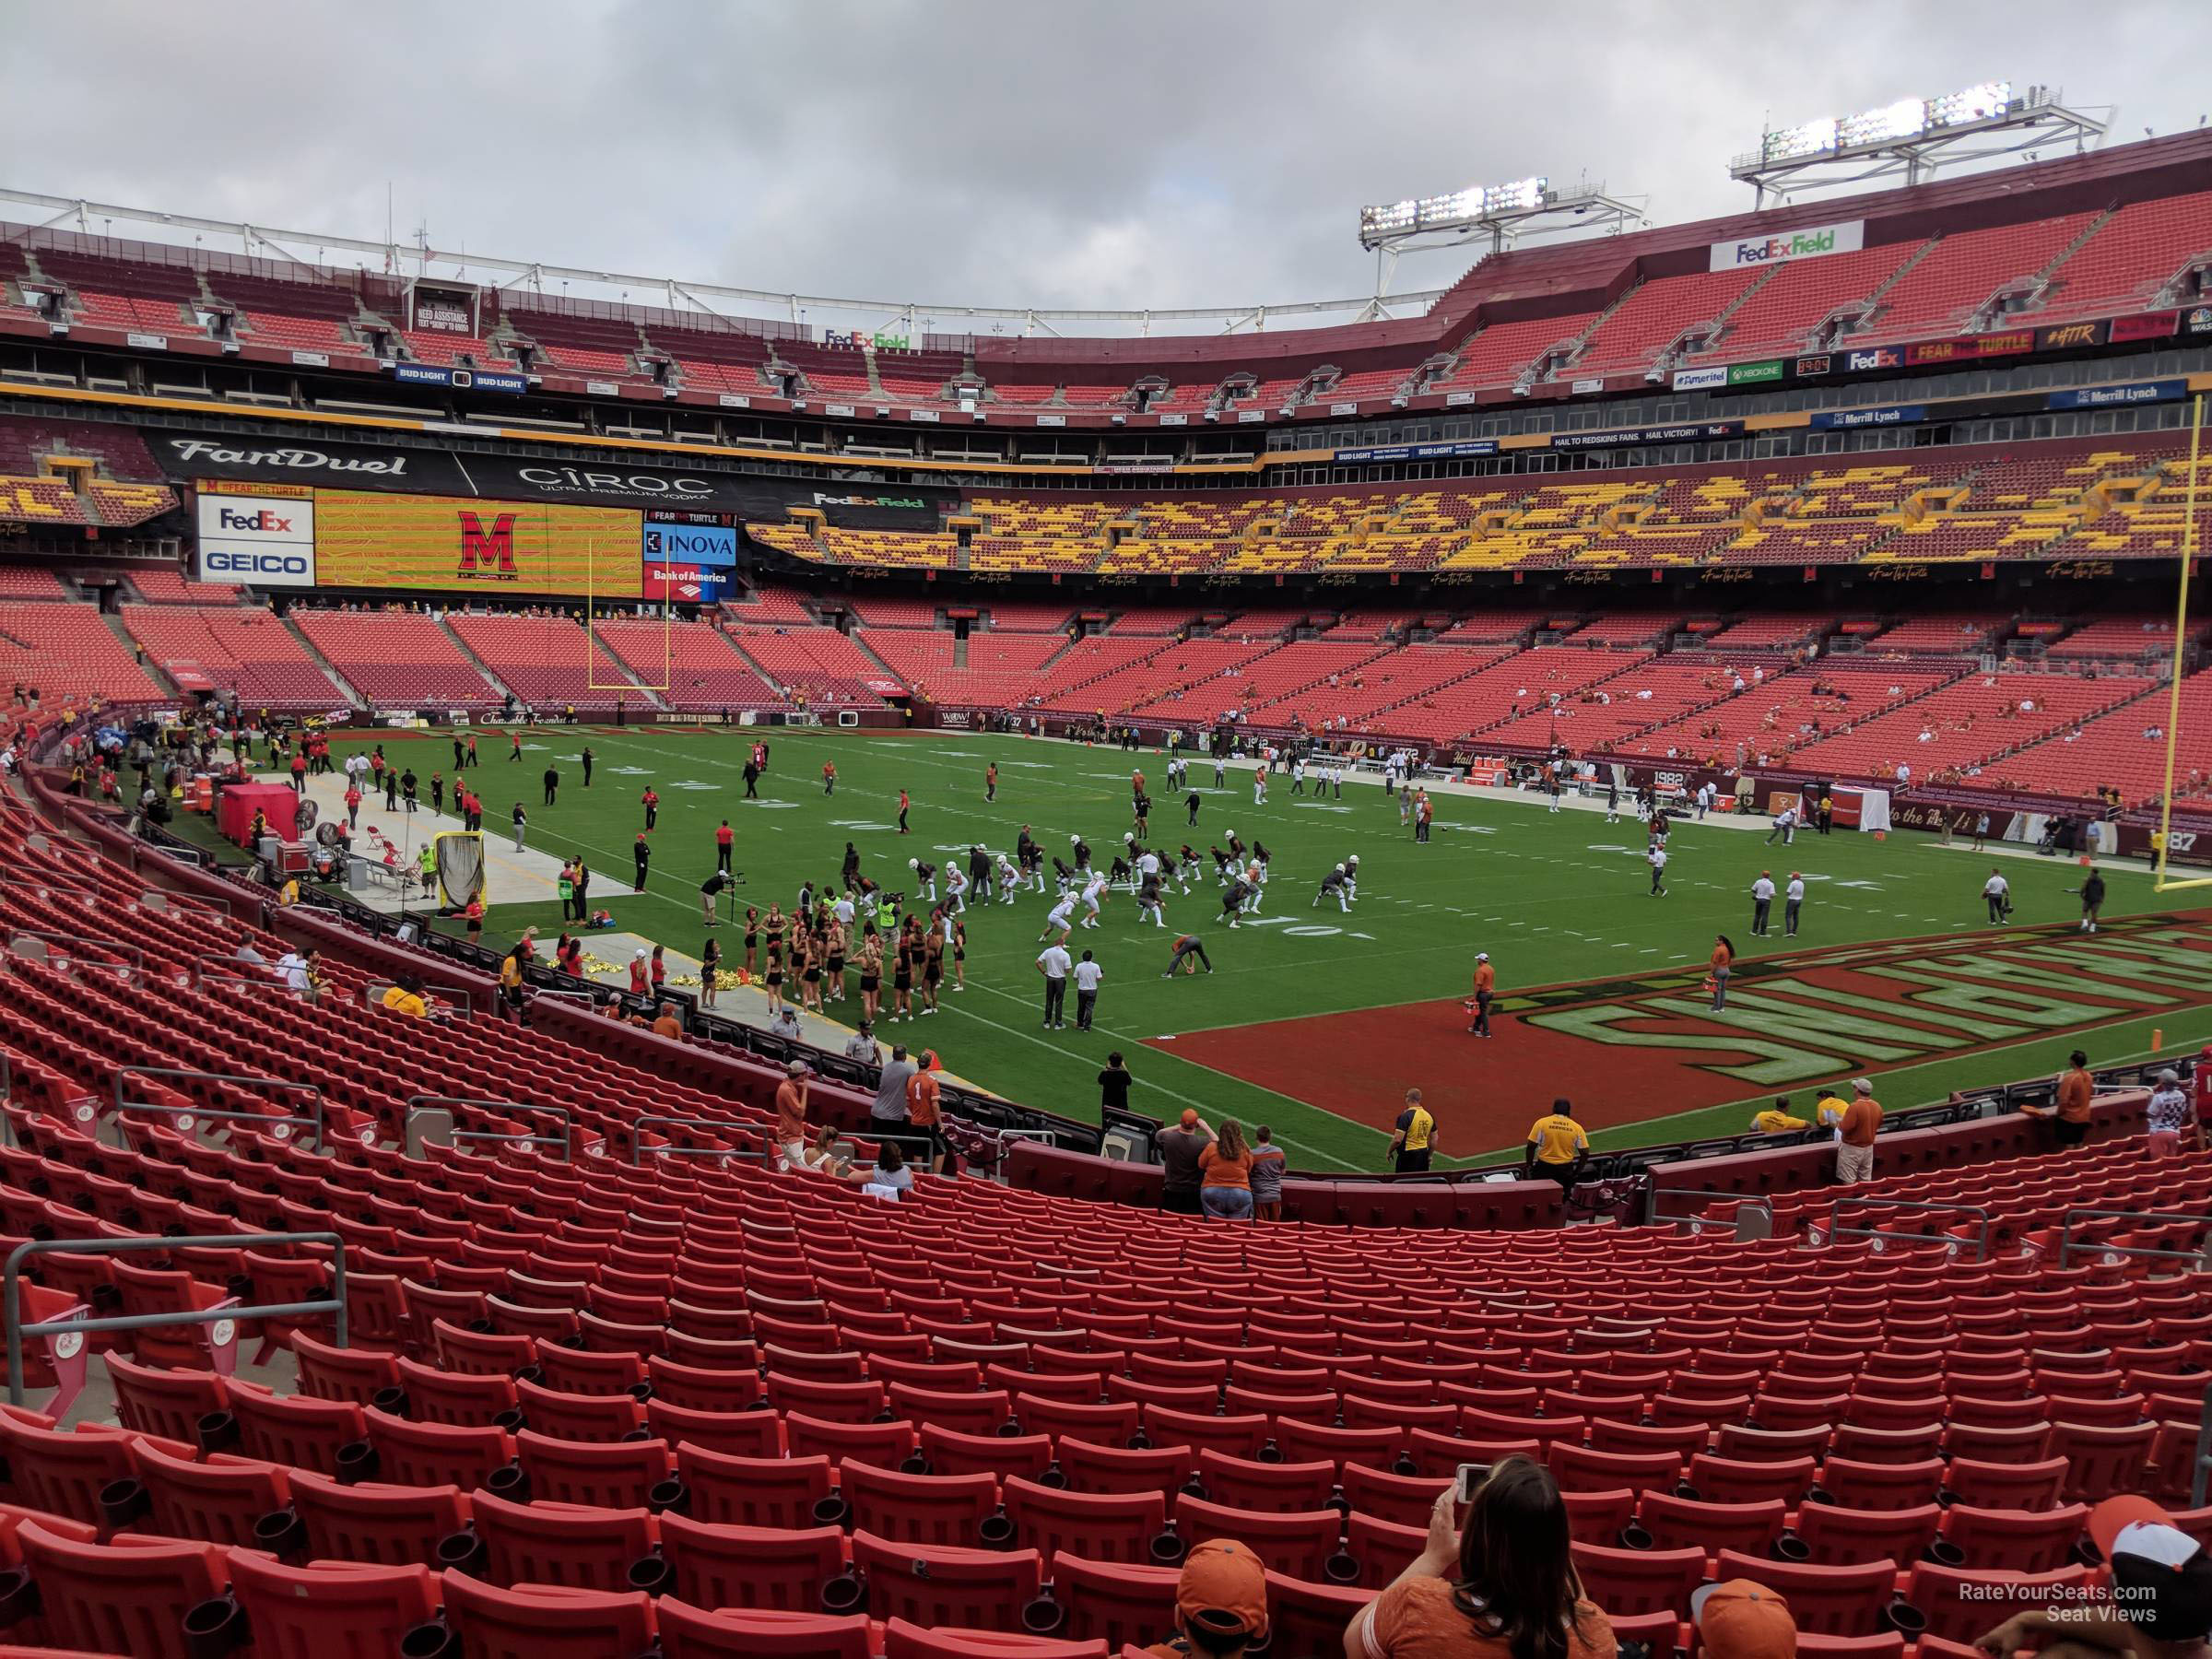 section 136, row 25 seat view  - fedexfield